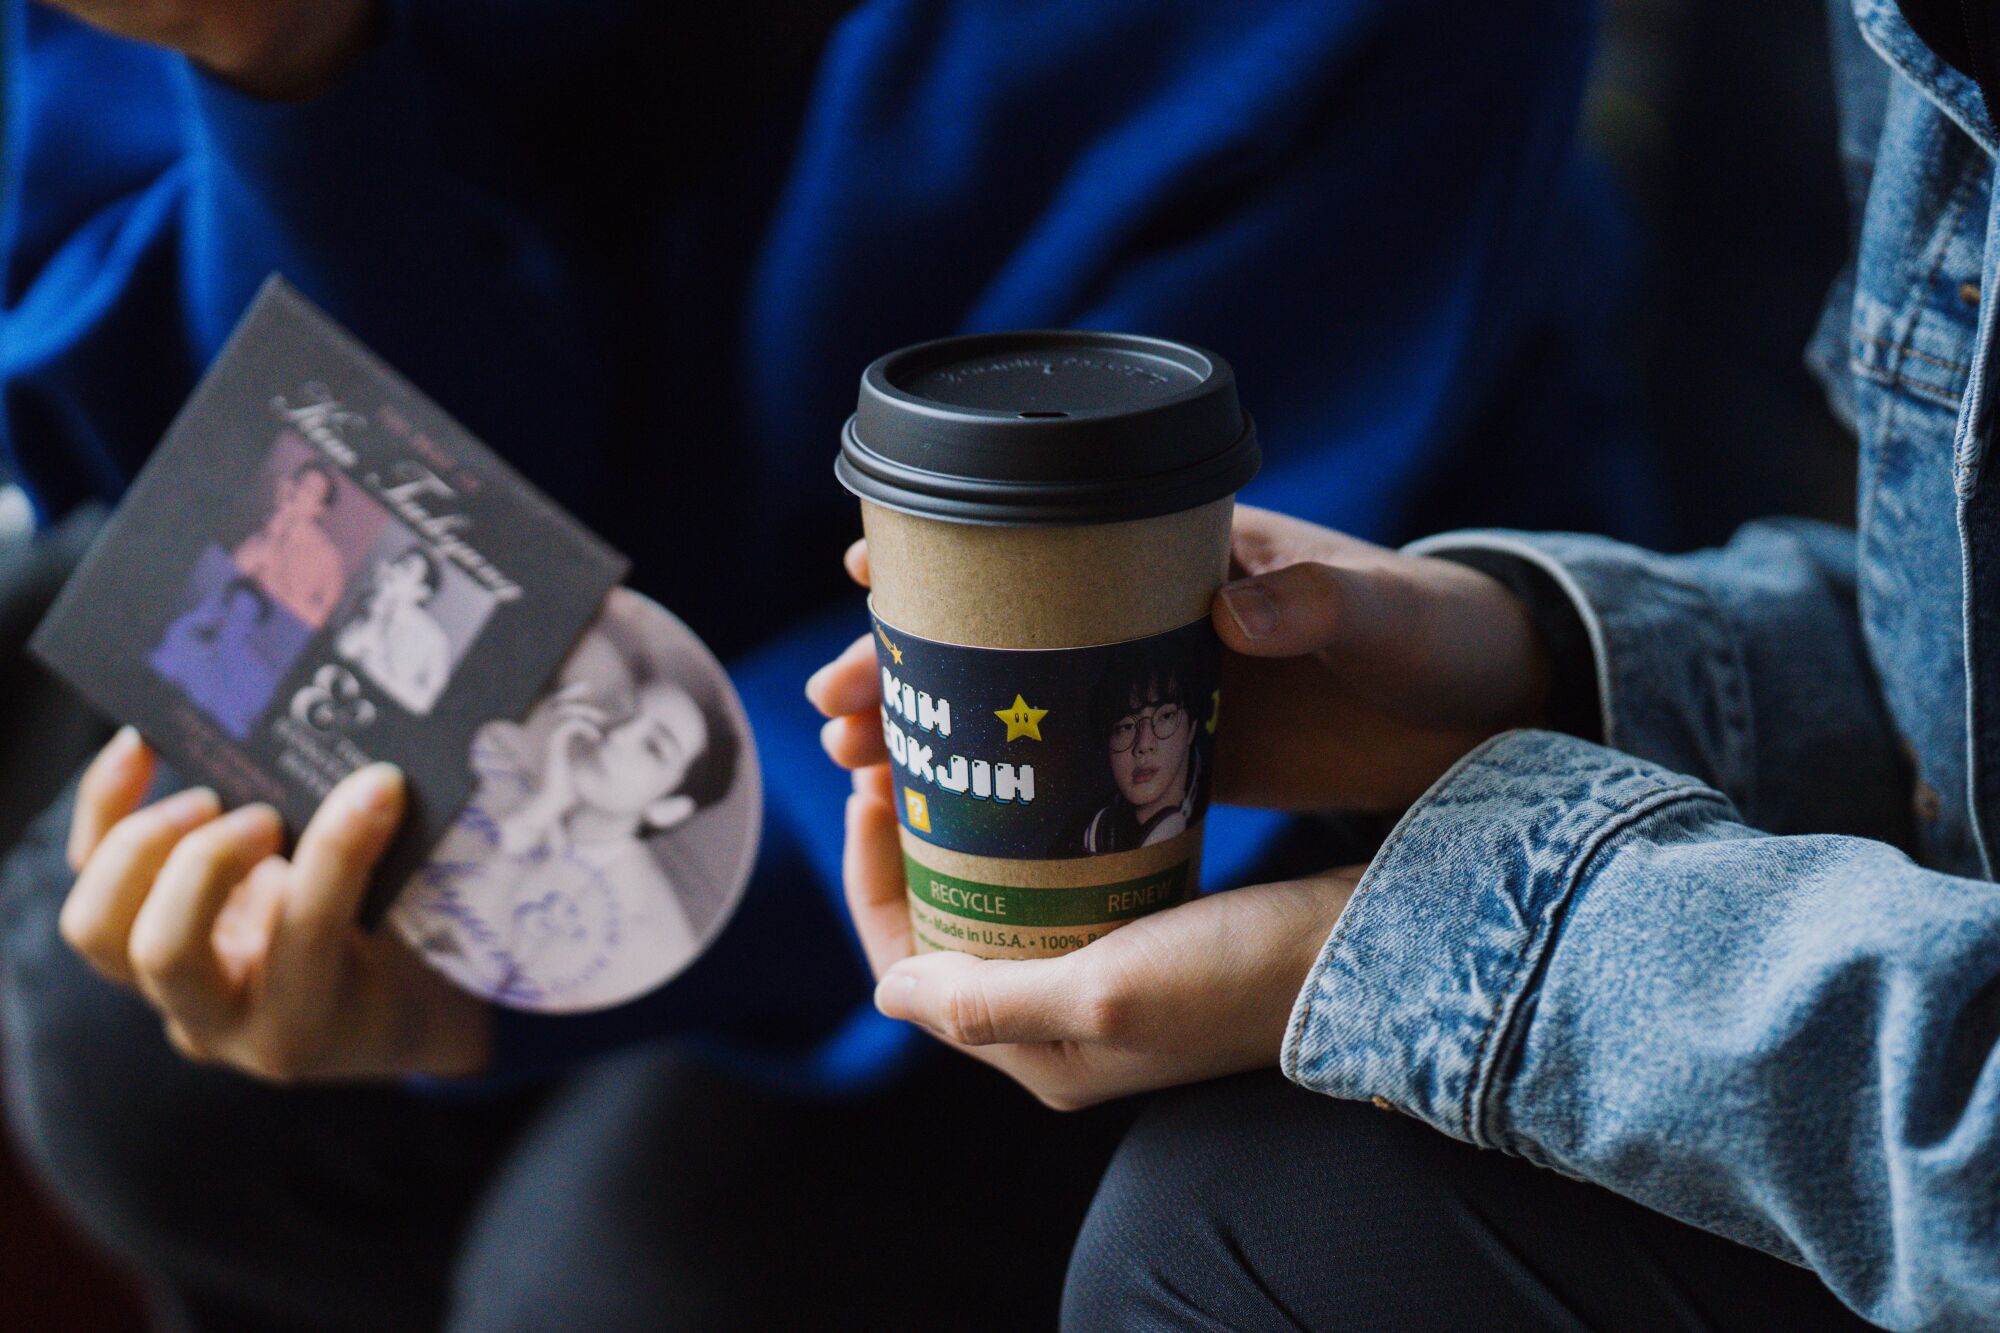 Fans hold merch and their freshly sleeved cups of tea during a cupsleeve event at R&B Tea.